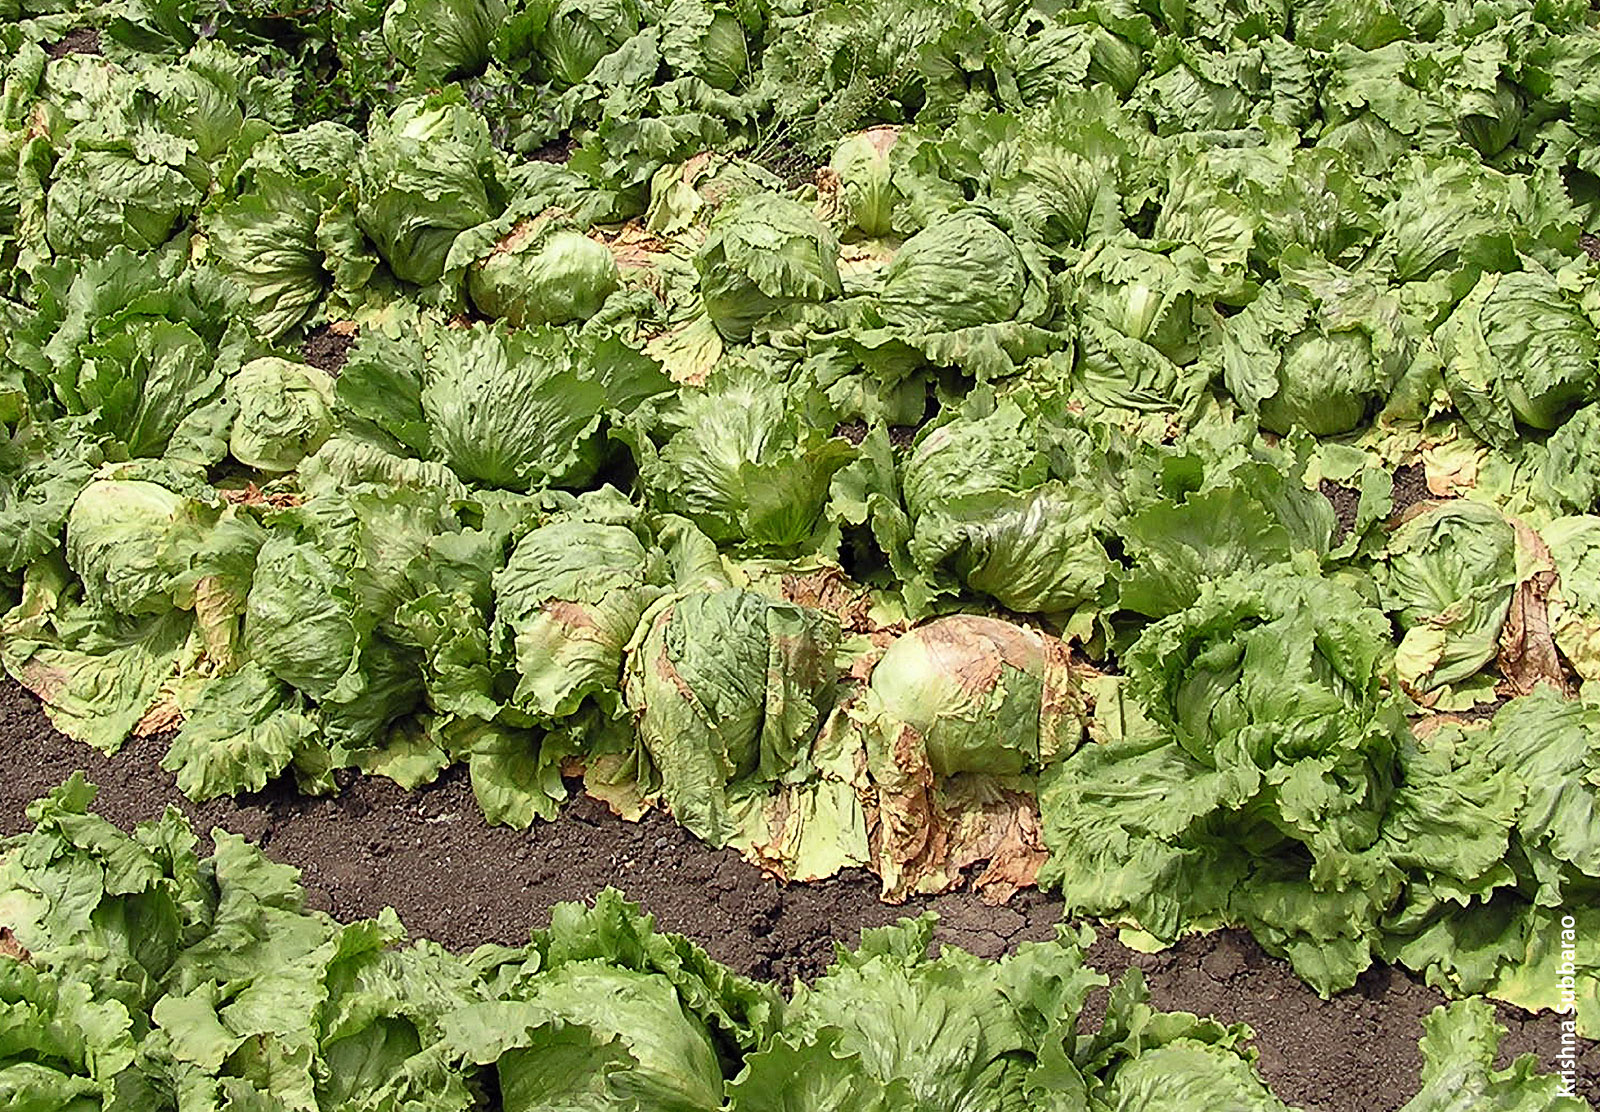 Lettuce infected with verticillium wilt. No effective treatment exists once plants are infected. Verticillium wilt can be controlled with soil fumigation, planting crops other than spinach, and the testing and cleaning spinach seeds.